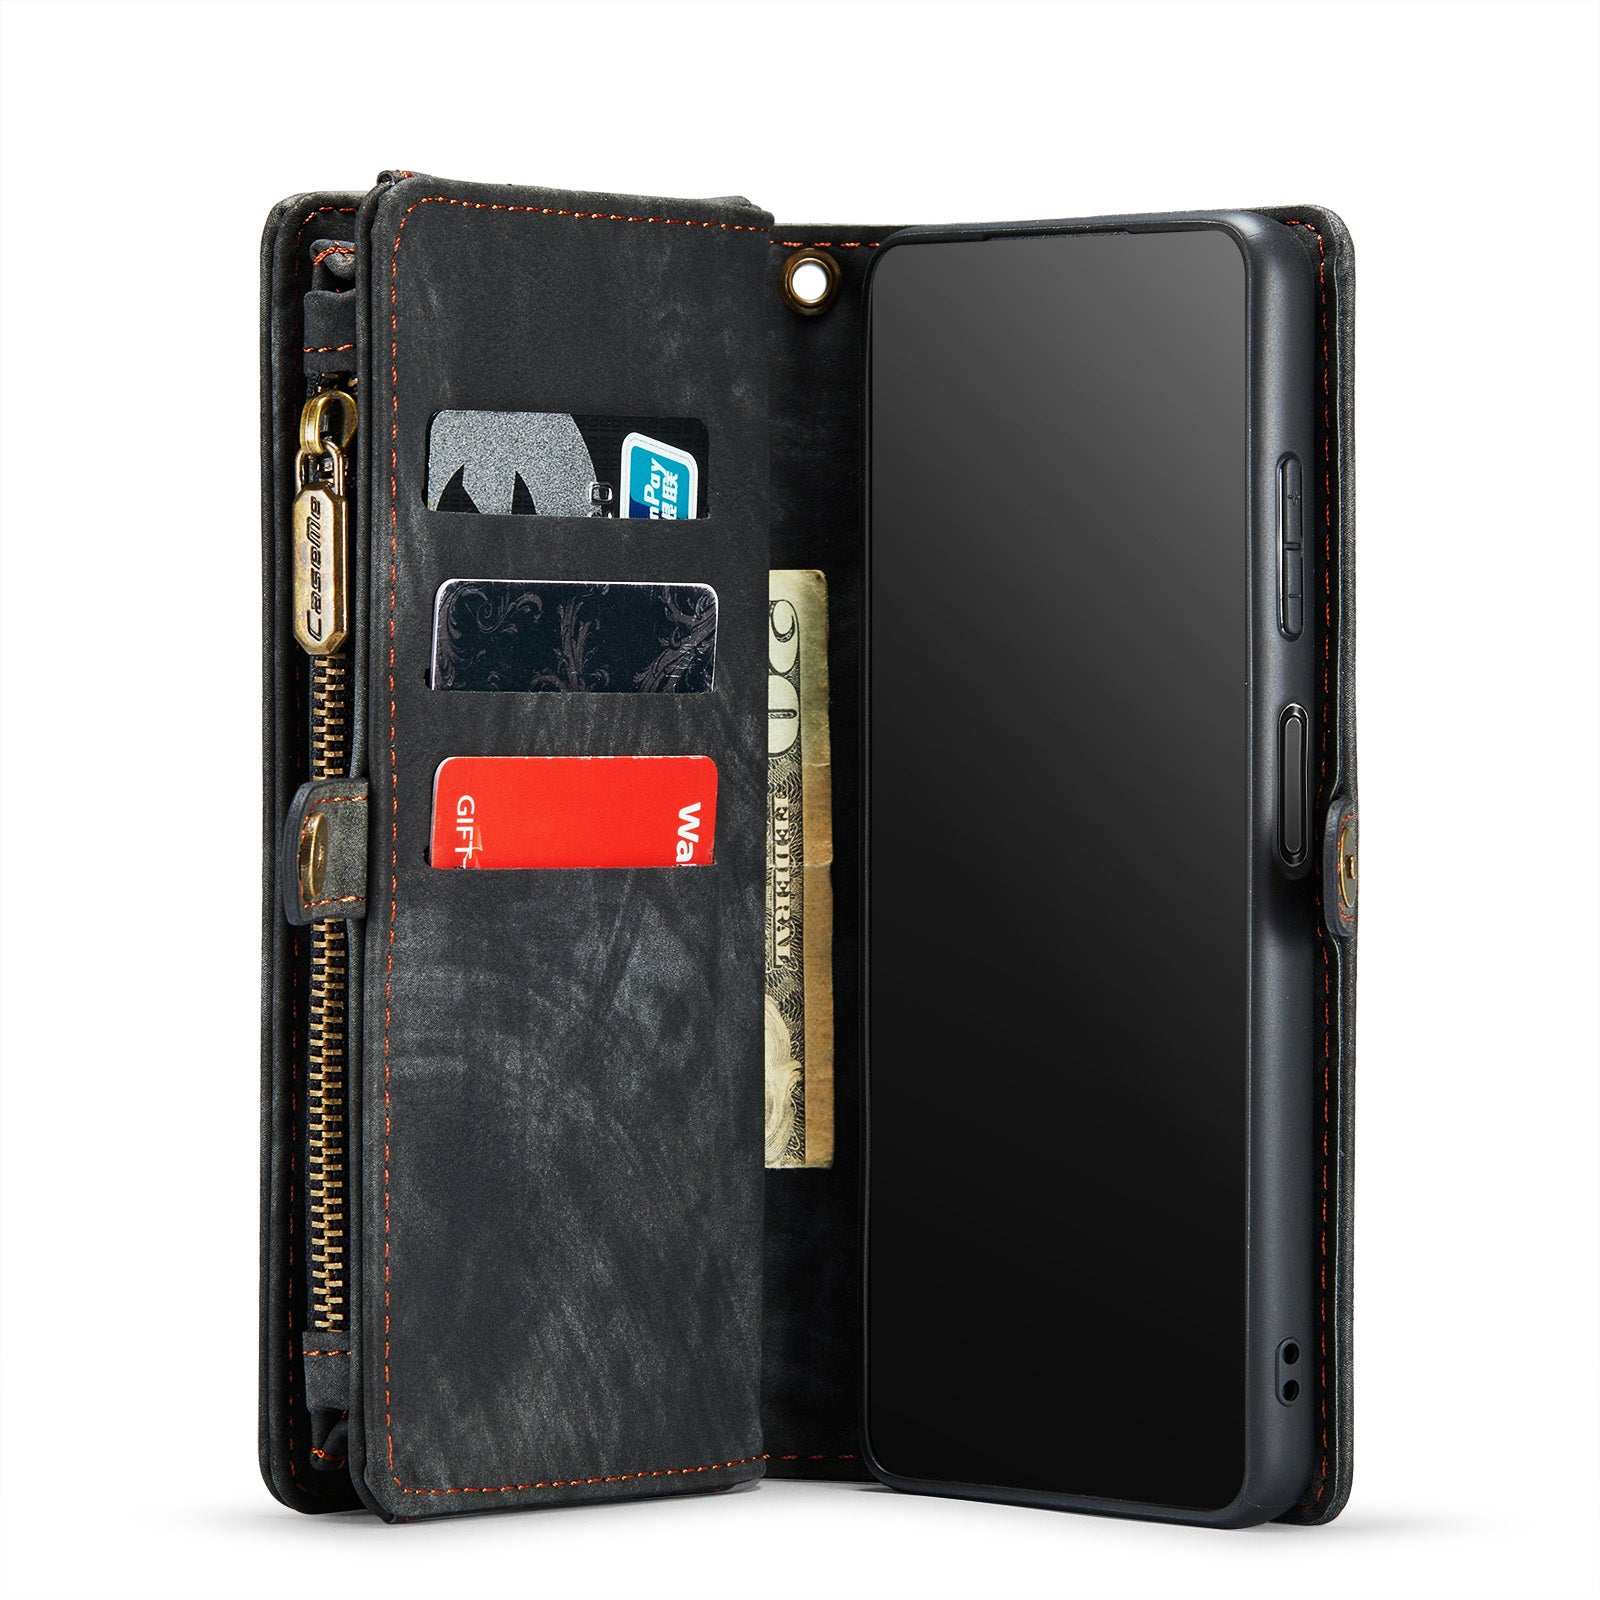 Samsung Caseme Durable Premium Leather Coin Folio with Card Holder Phone Case